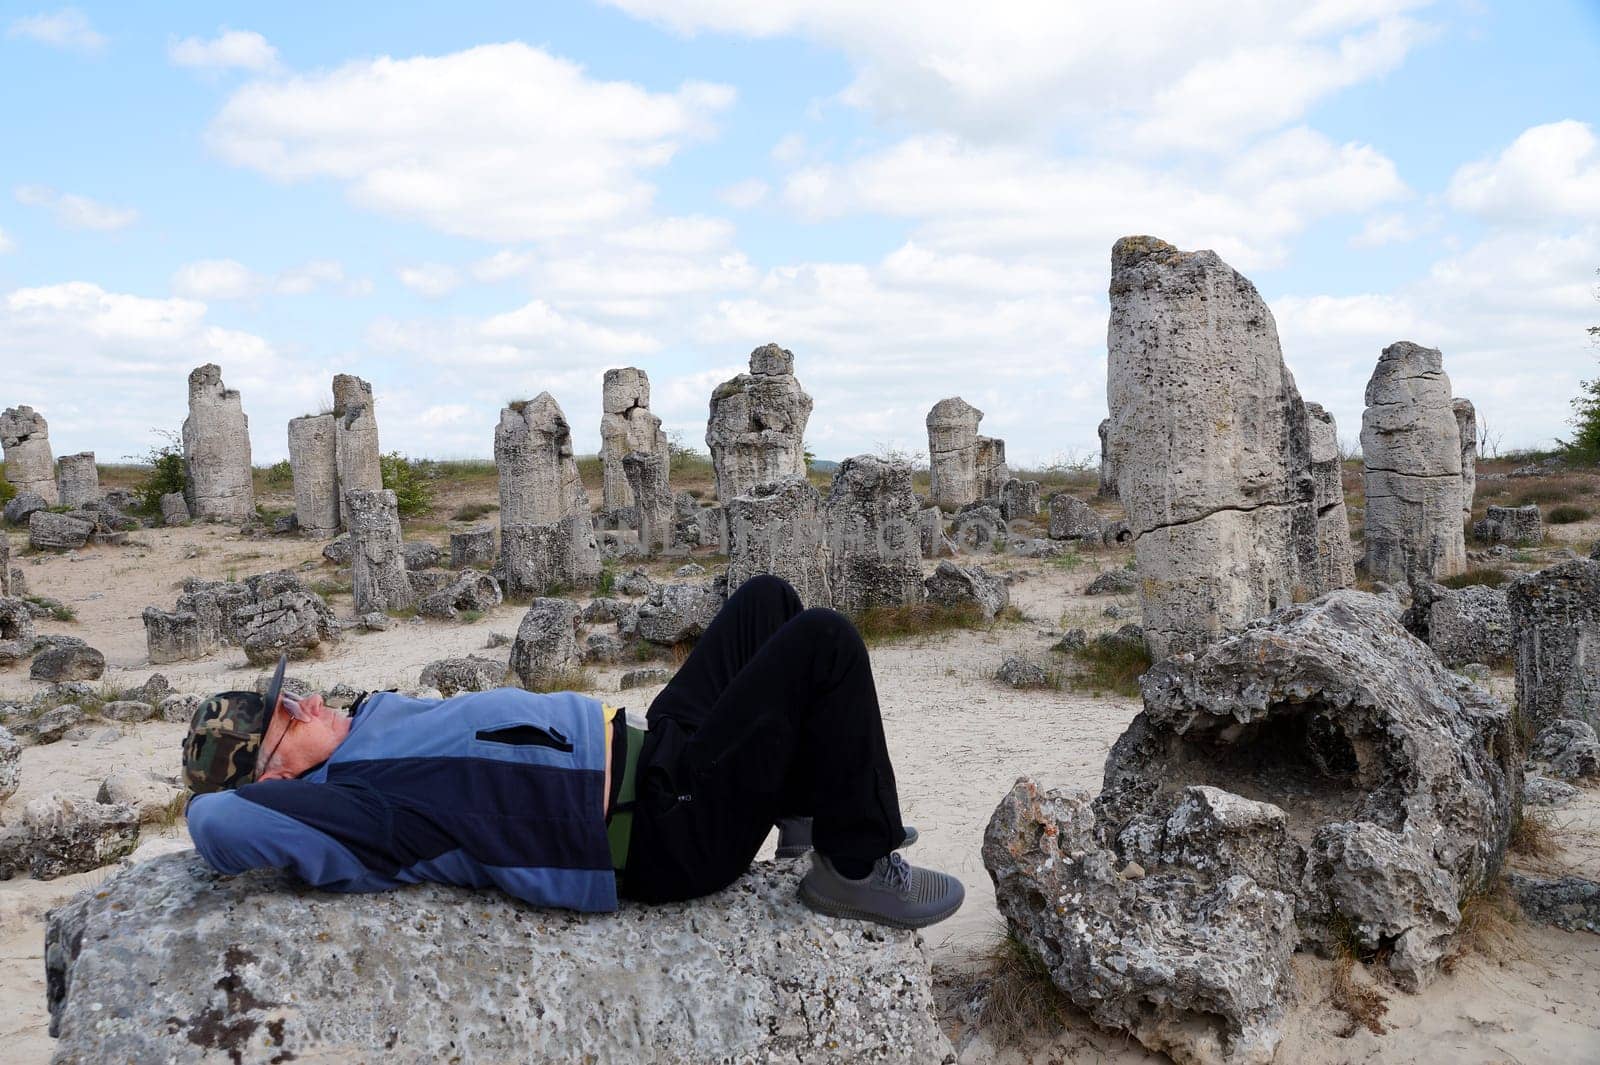 a lonely tourist rests on a stone in a historical open-air museum among ancient stone pillars.